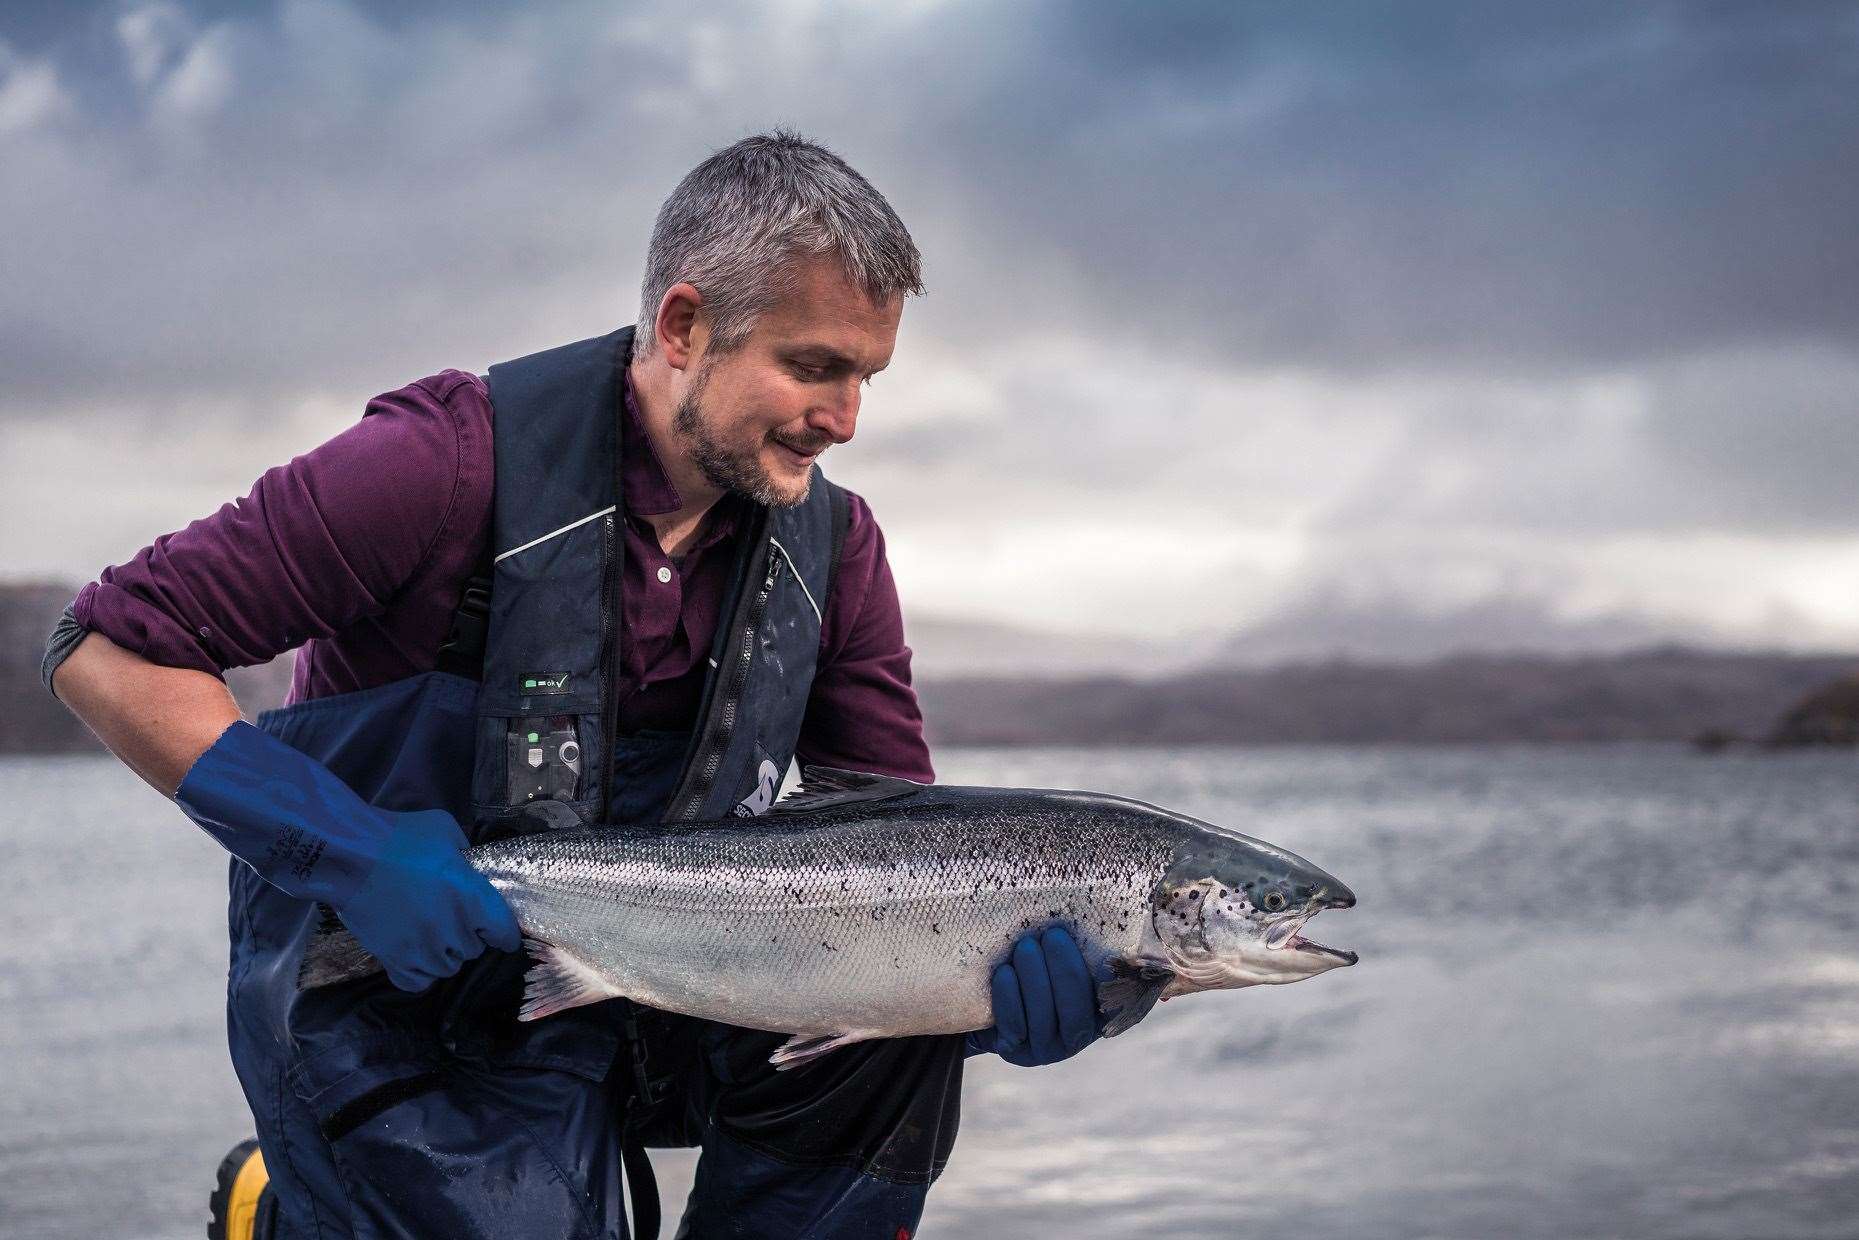 Loch Duart aims to produce salmon as sustainably as possible.